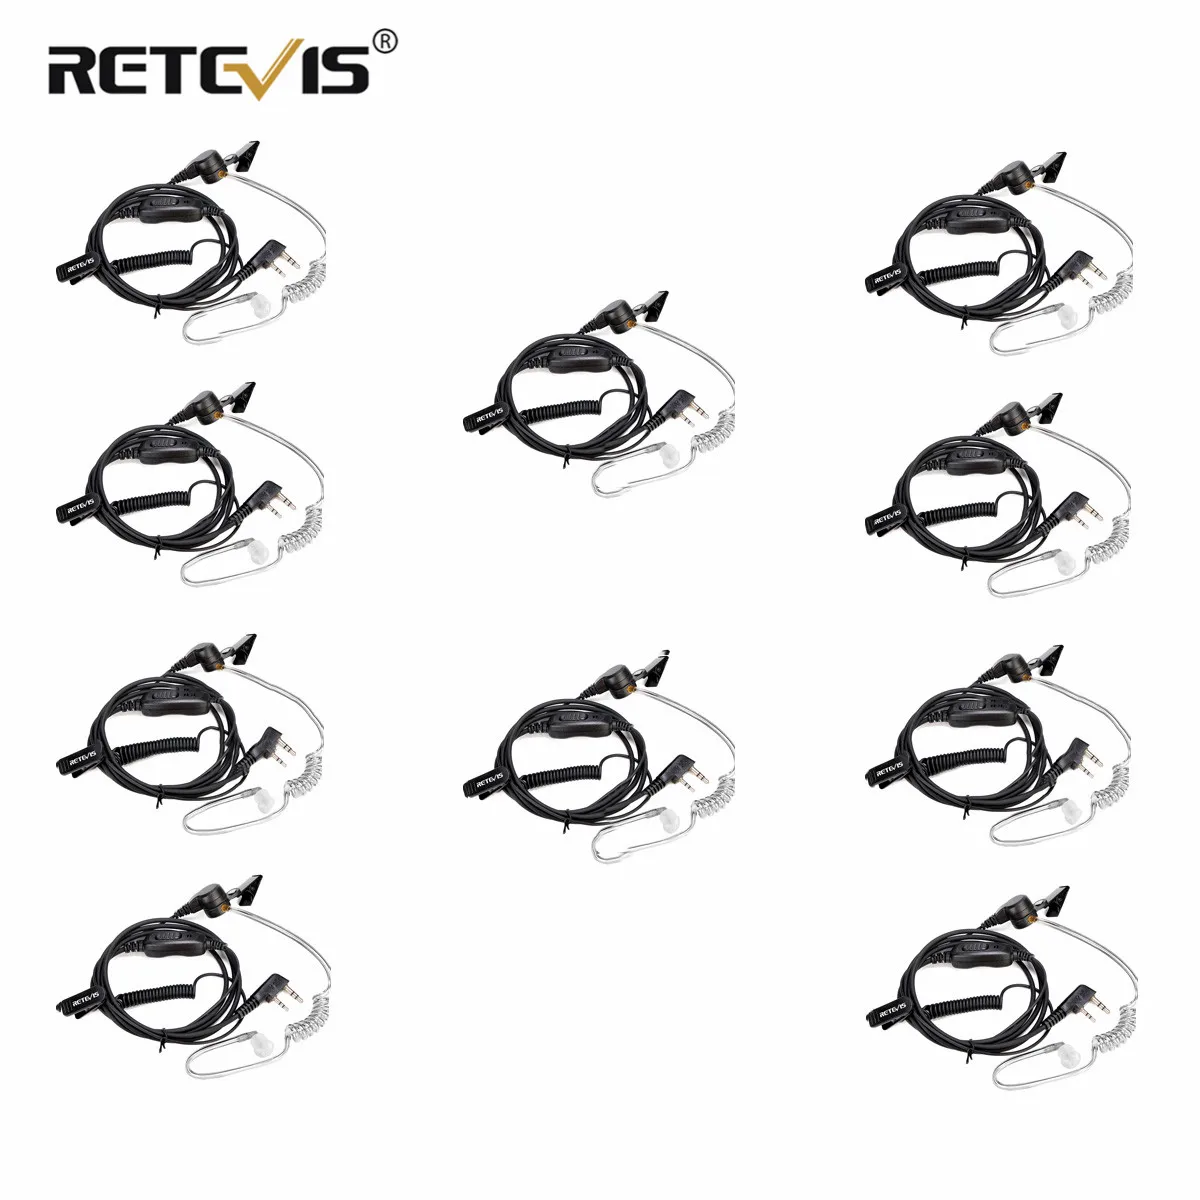 Retevis 10pcs 2Pin Walkie Talkie Earphones Acoustic Tube Headset With PTT MIC For Kenwood Puxing Retevis Baofeng UV5R UV82 UV9R walkie talkie charger car charger boost cable usb power cord for uv5r uv82 bff8hp uv82 hp uv9r wireless walkie talkie